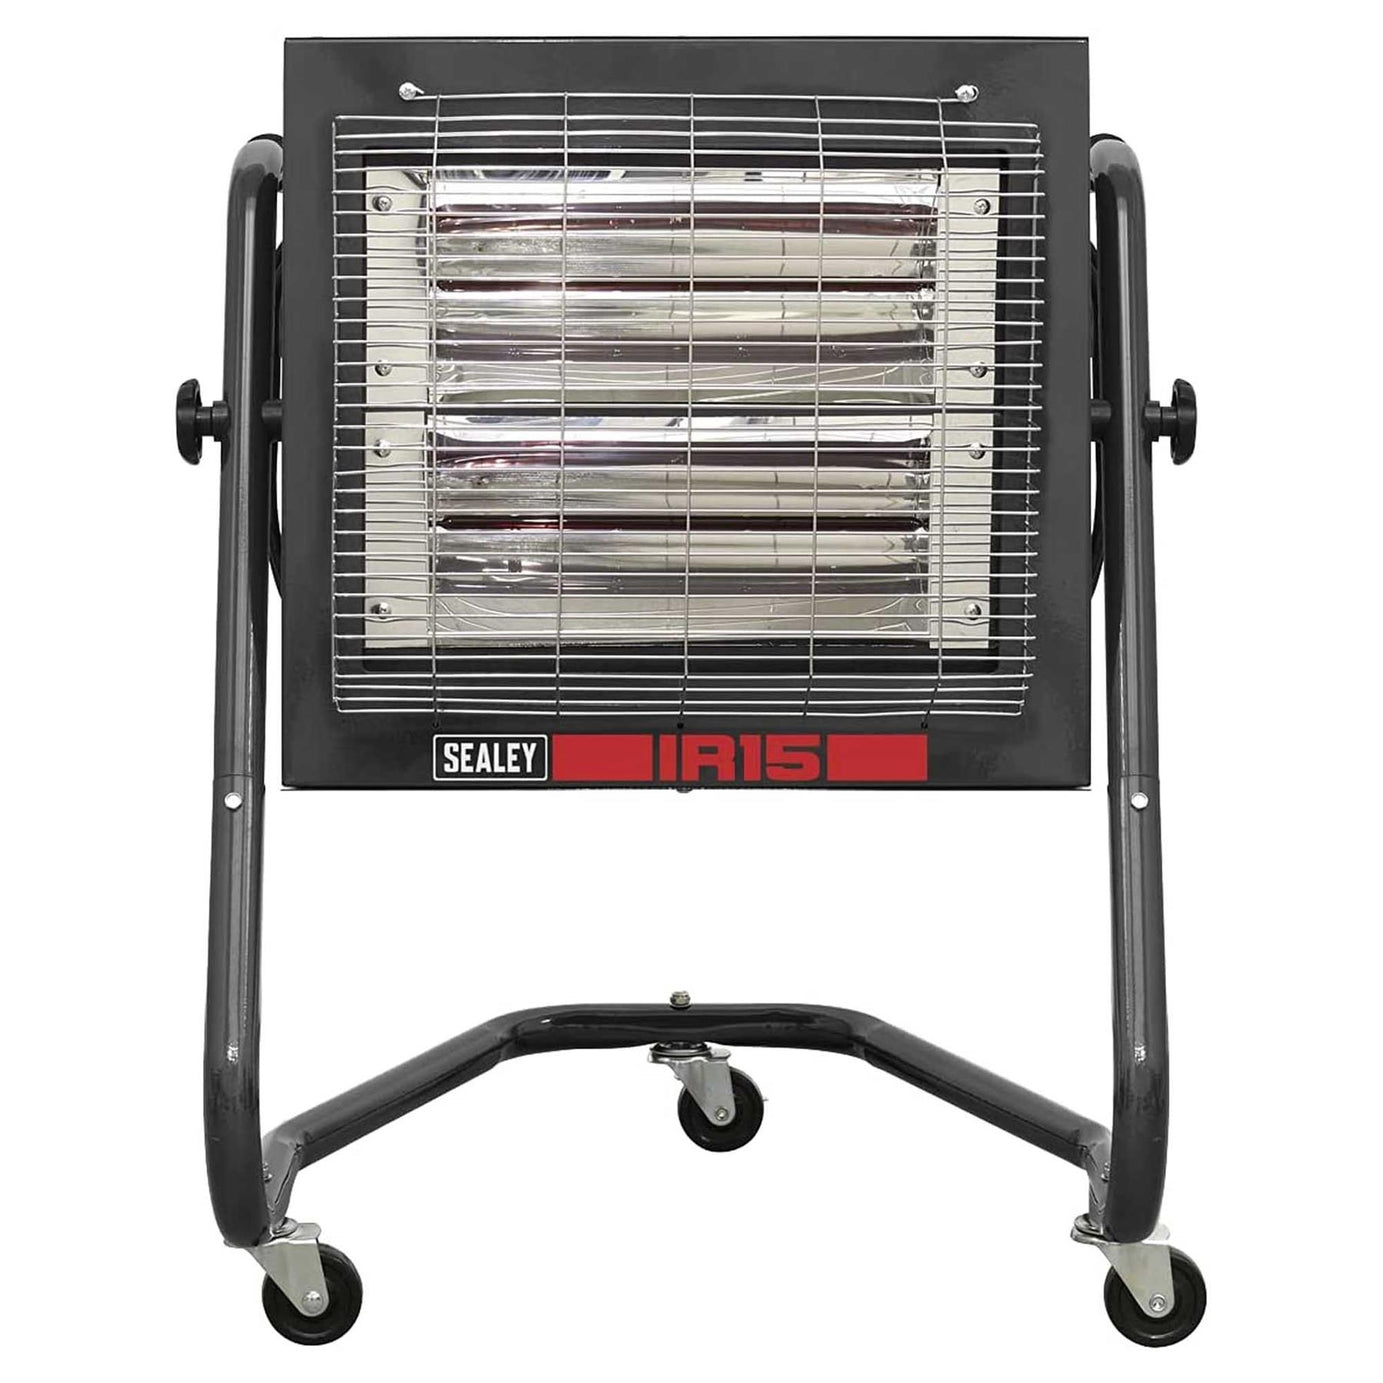 Sealey Infrared Cabinet Heater 1.2/2.4kW 110V